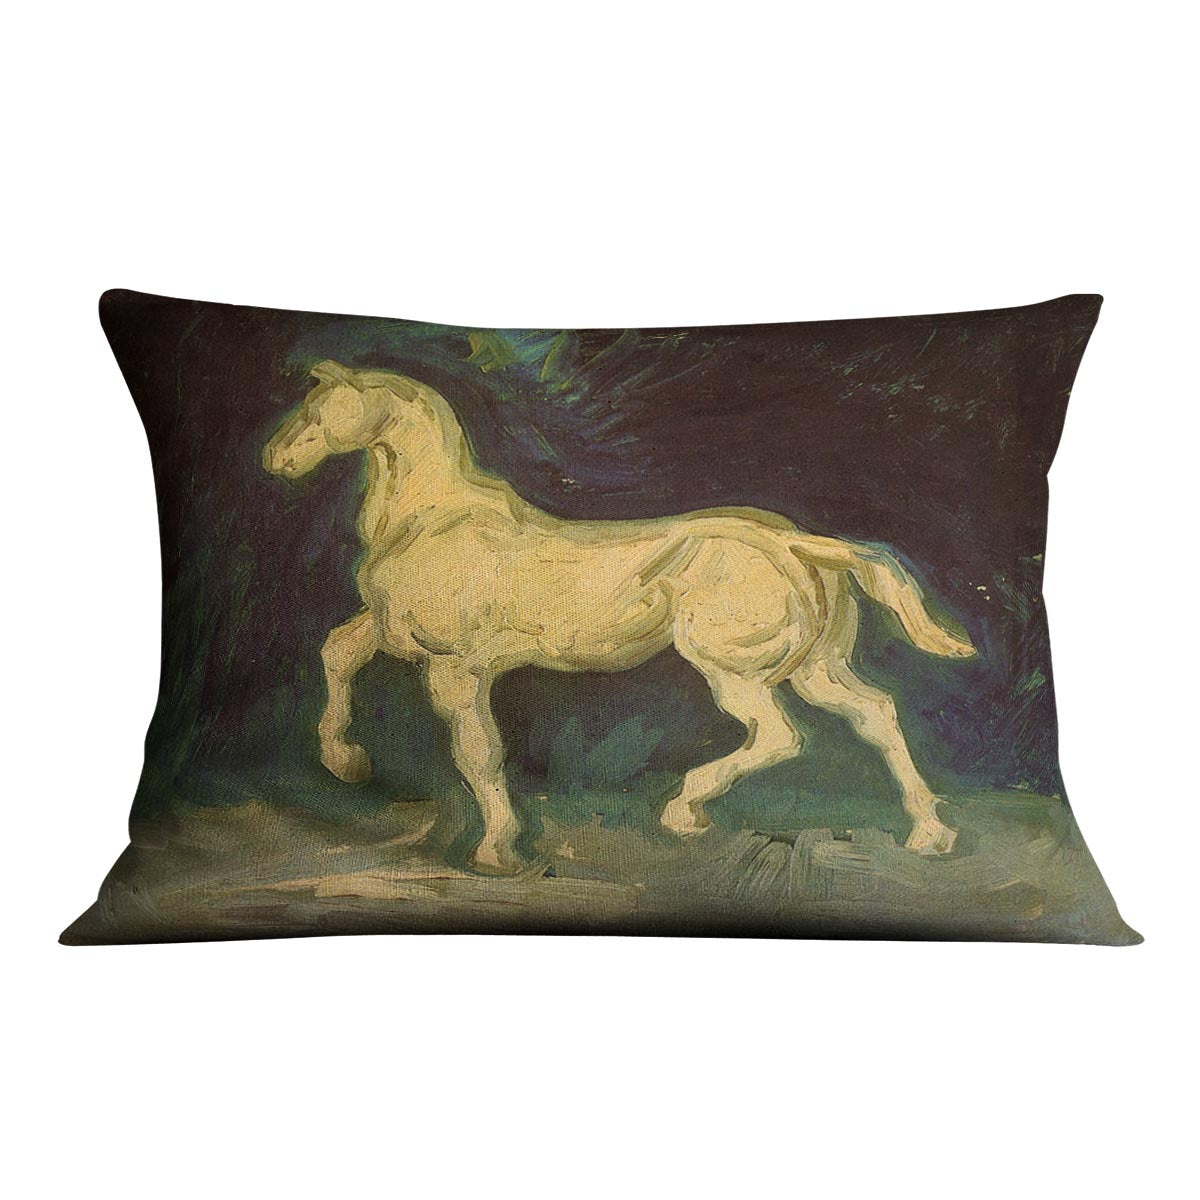 Plaster Statuette of a Horse by Van Gogh Cushion